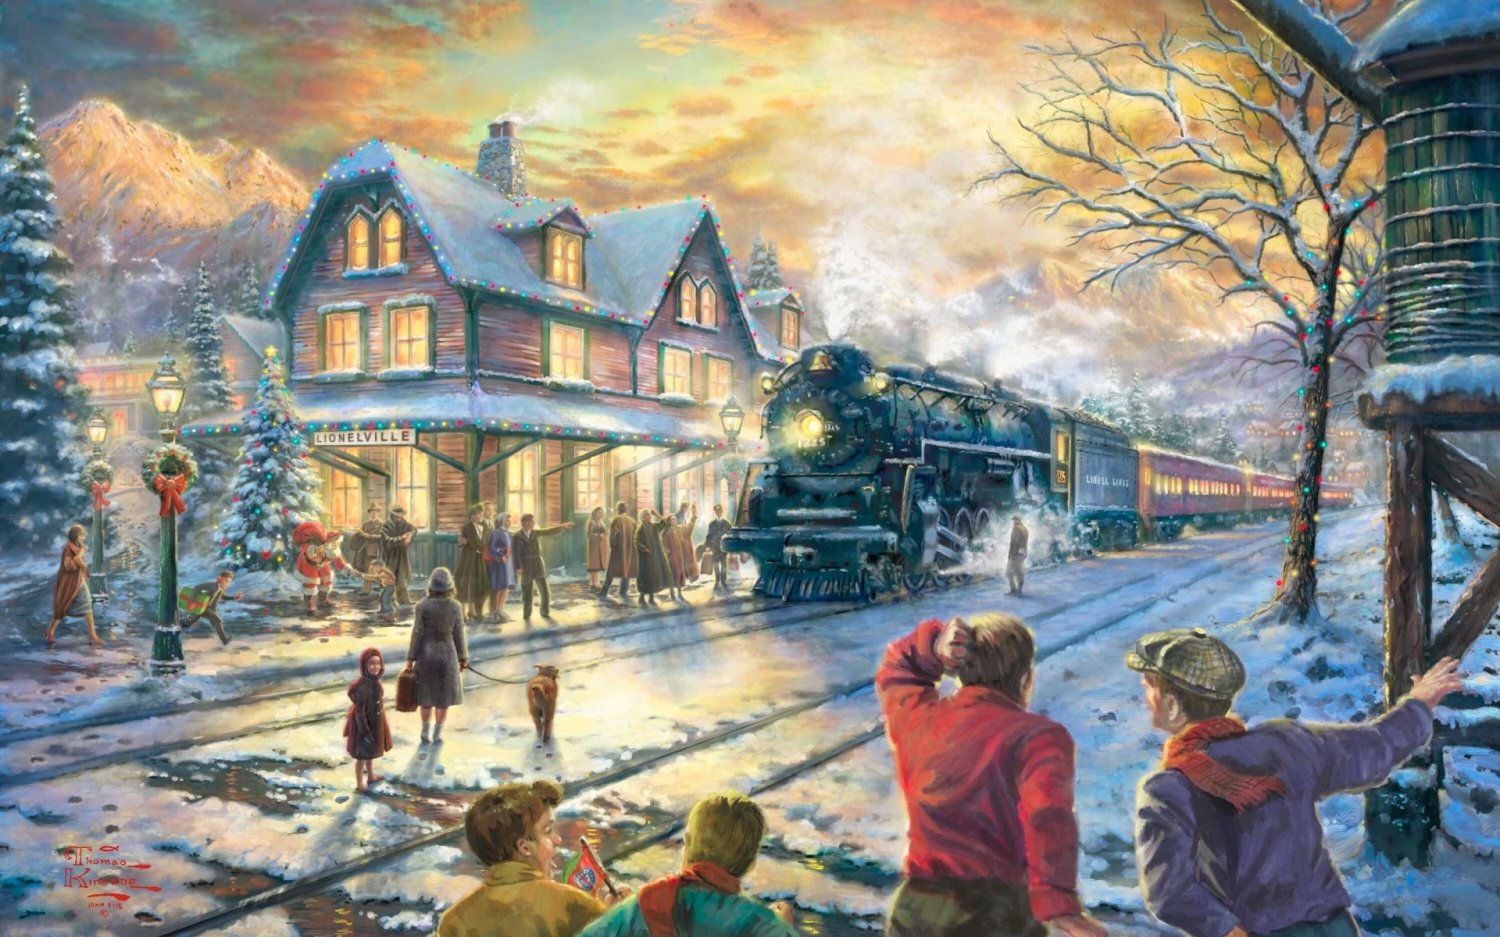 All Aboard for Christmas inspirated to Kink@de Cross Stitch Pattern Pdf 496 * 310 stitches E456